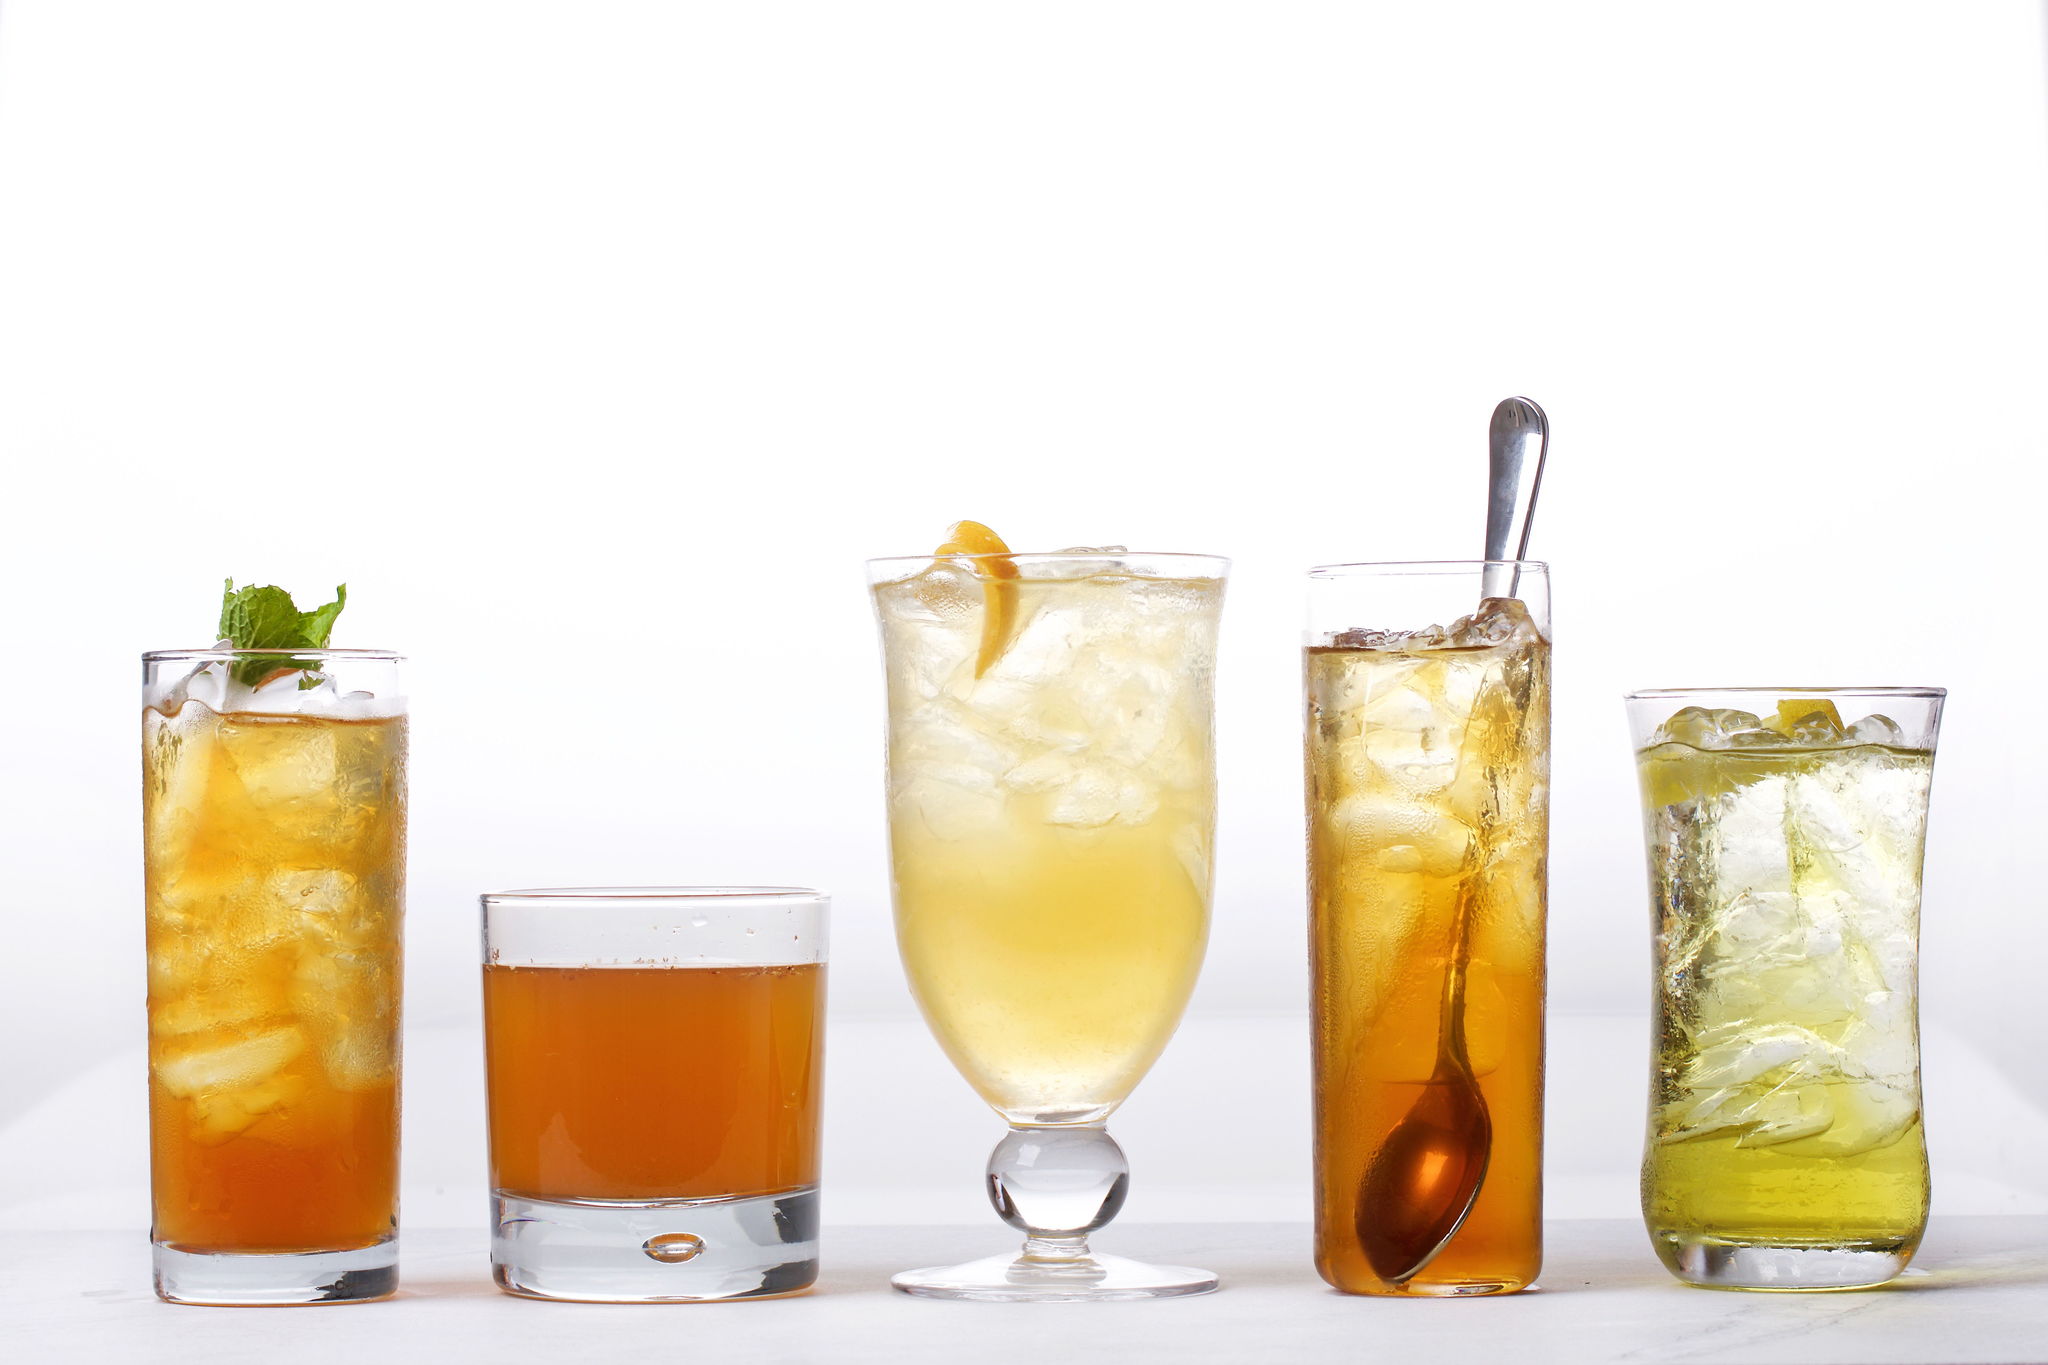 All these cocktails make use of the flavors of tea. From left, the Porchard, I Love Humanity, La Bergamote Juste, High Tea, Summer Suzie.